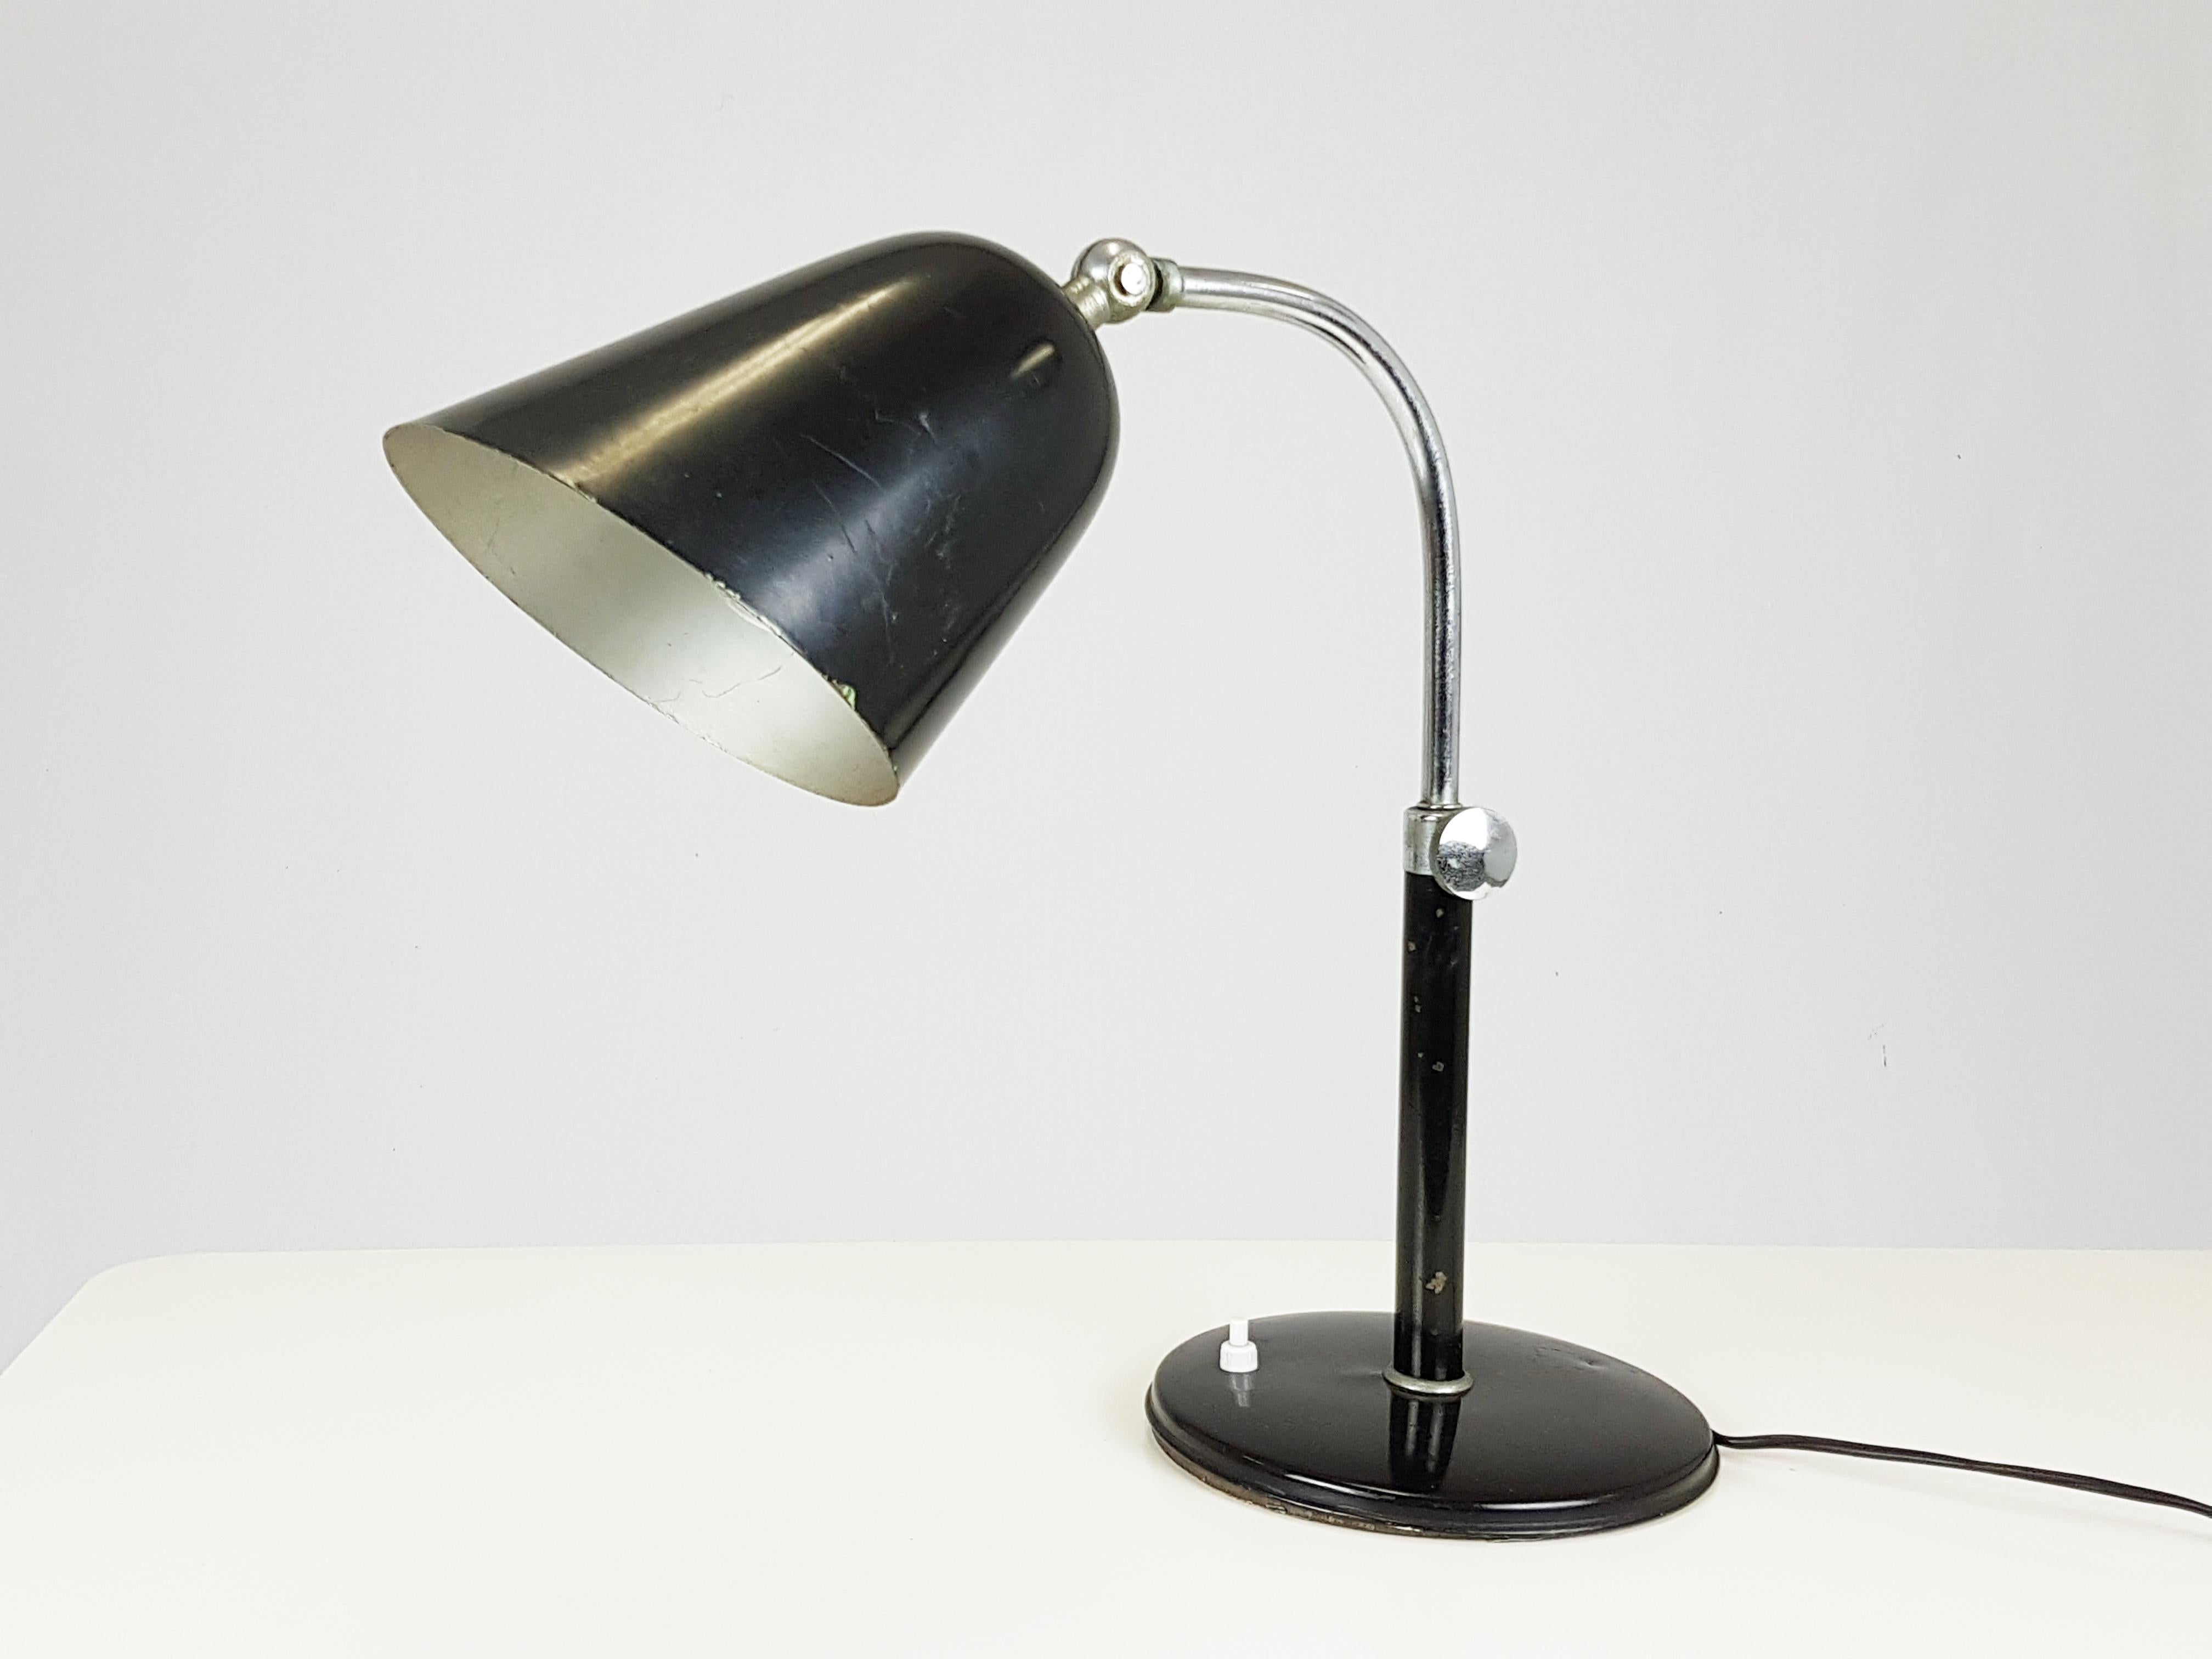 Rare Chrome Plated & Black Painted Metal Rationalist Table Lamp by I. Gardella For Sale 8